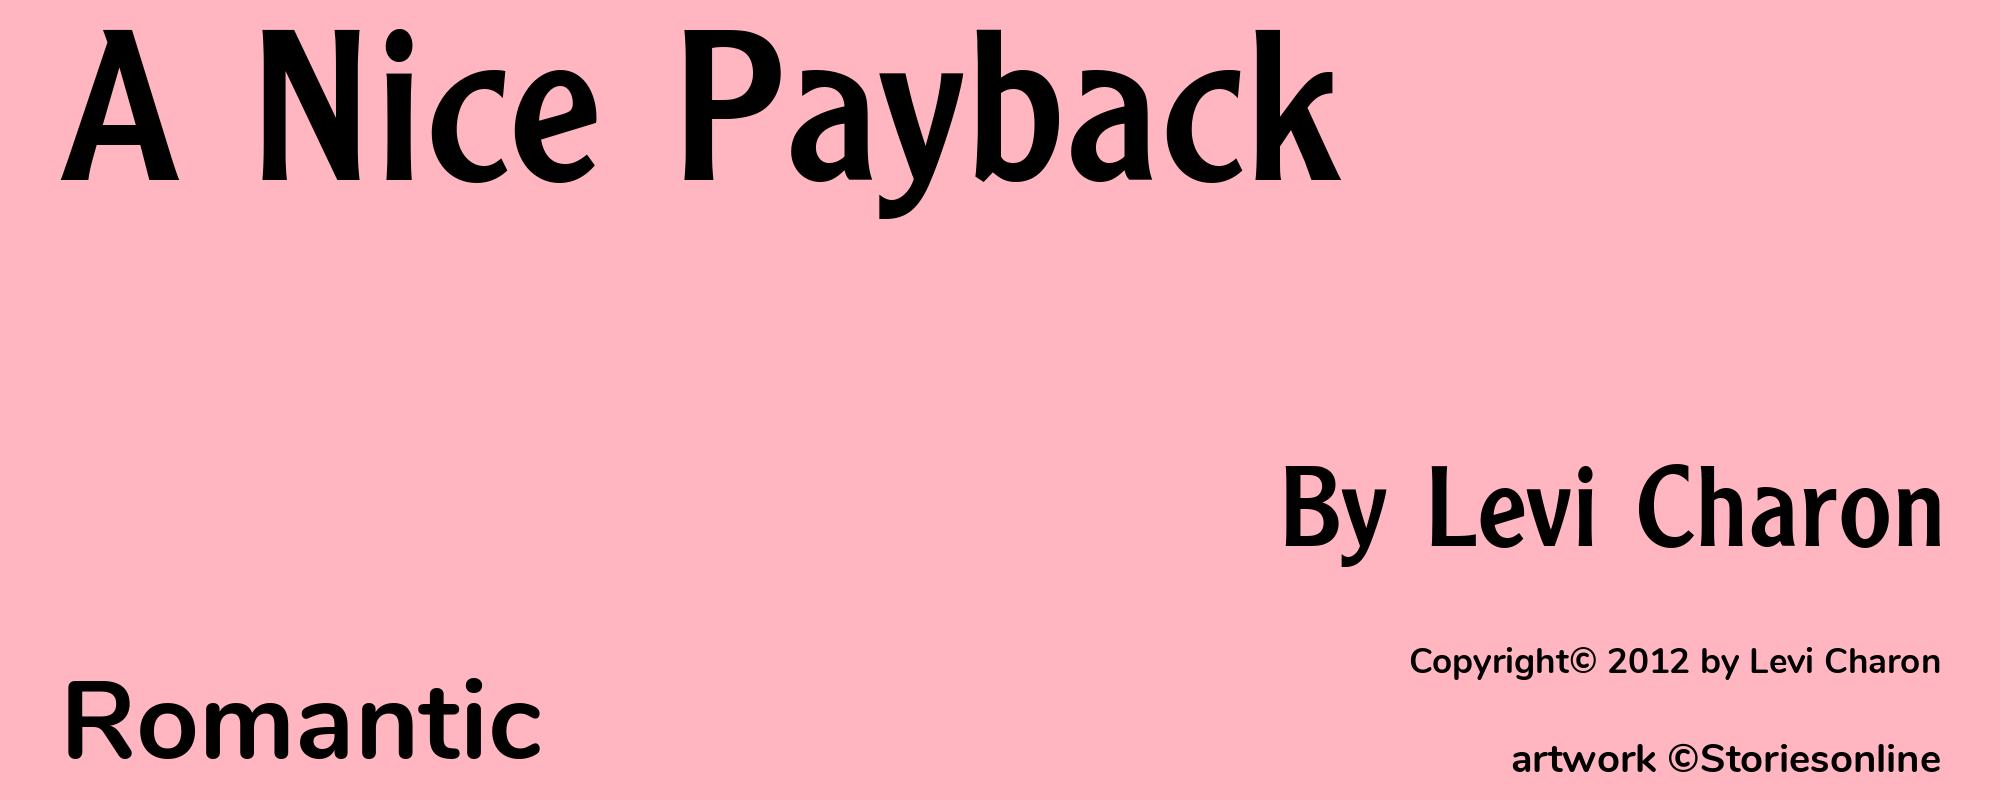 A Nice Payback - Cover